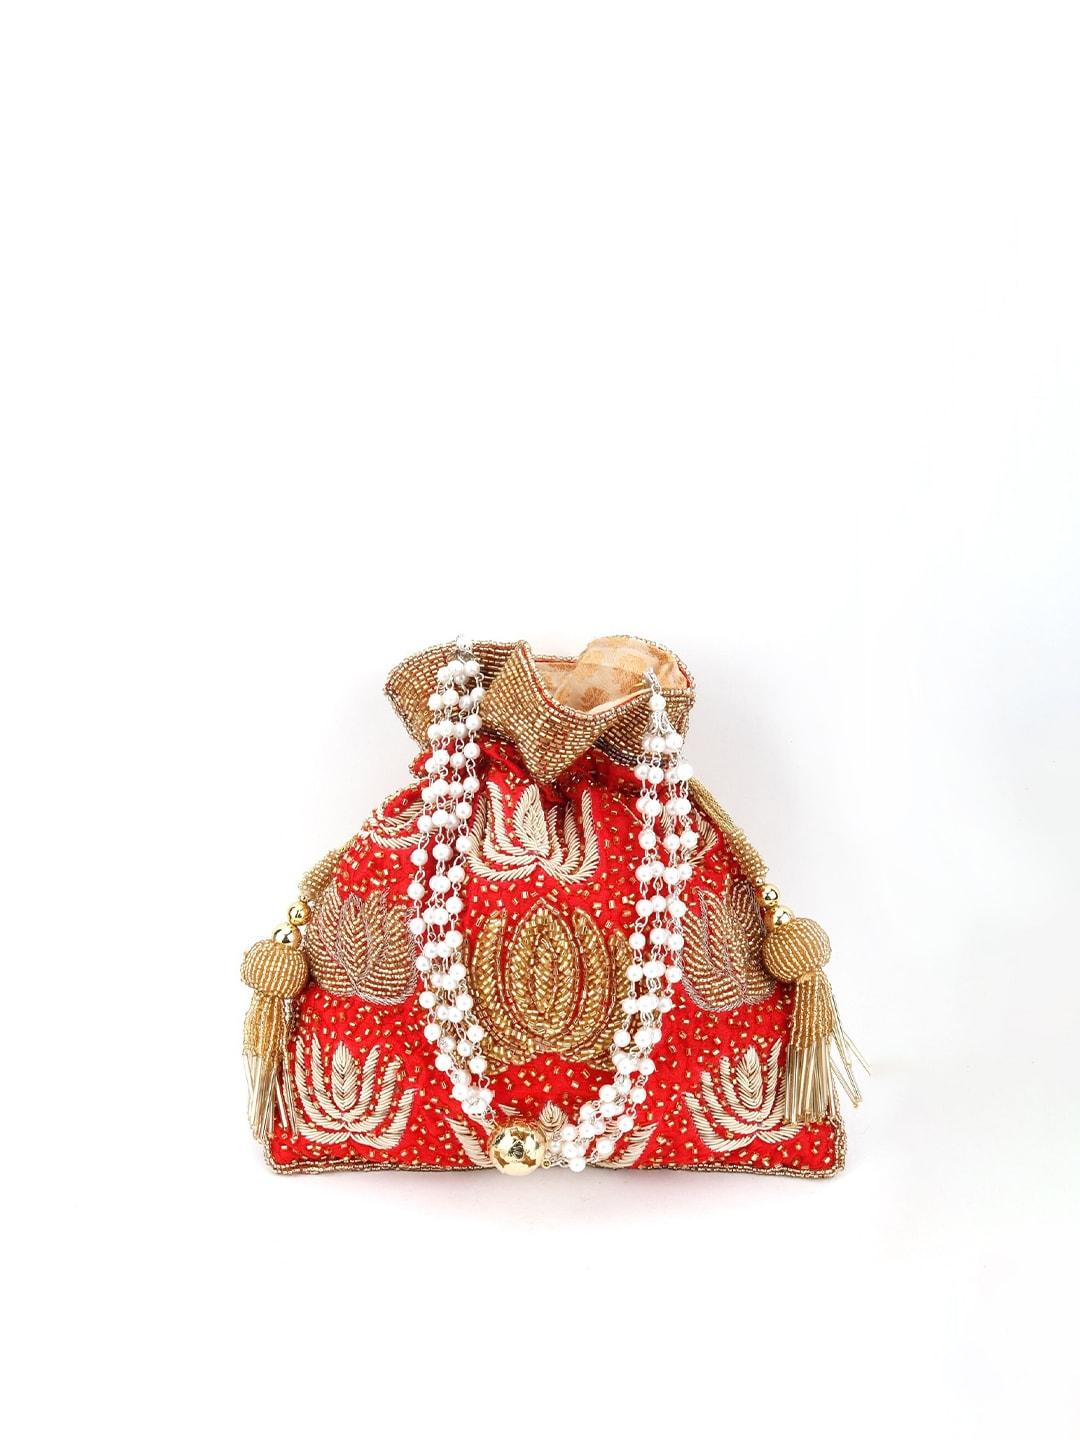 odette red & gold-toned textured embroidered potli clutch